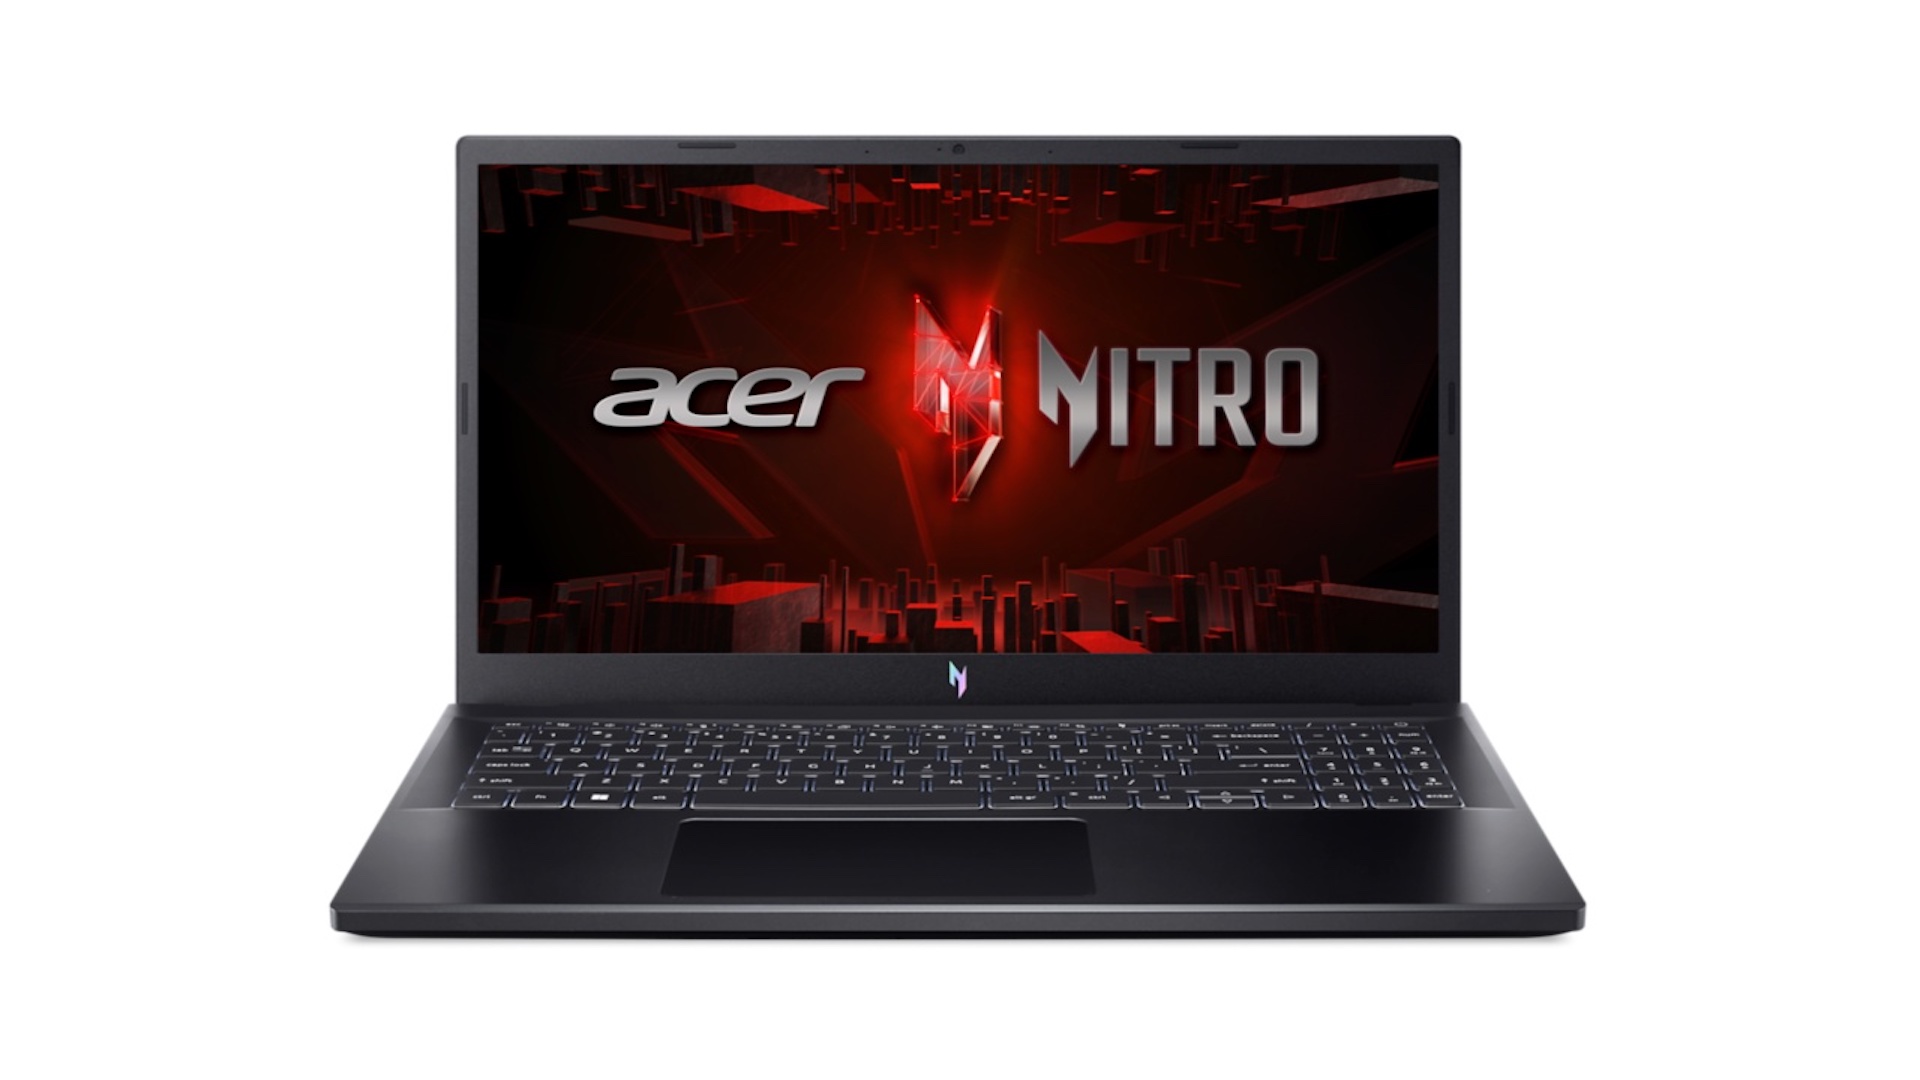 front view of black laptop with Nitro logo on display